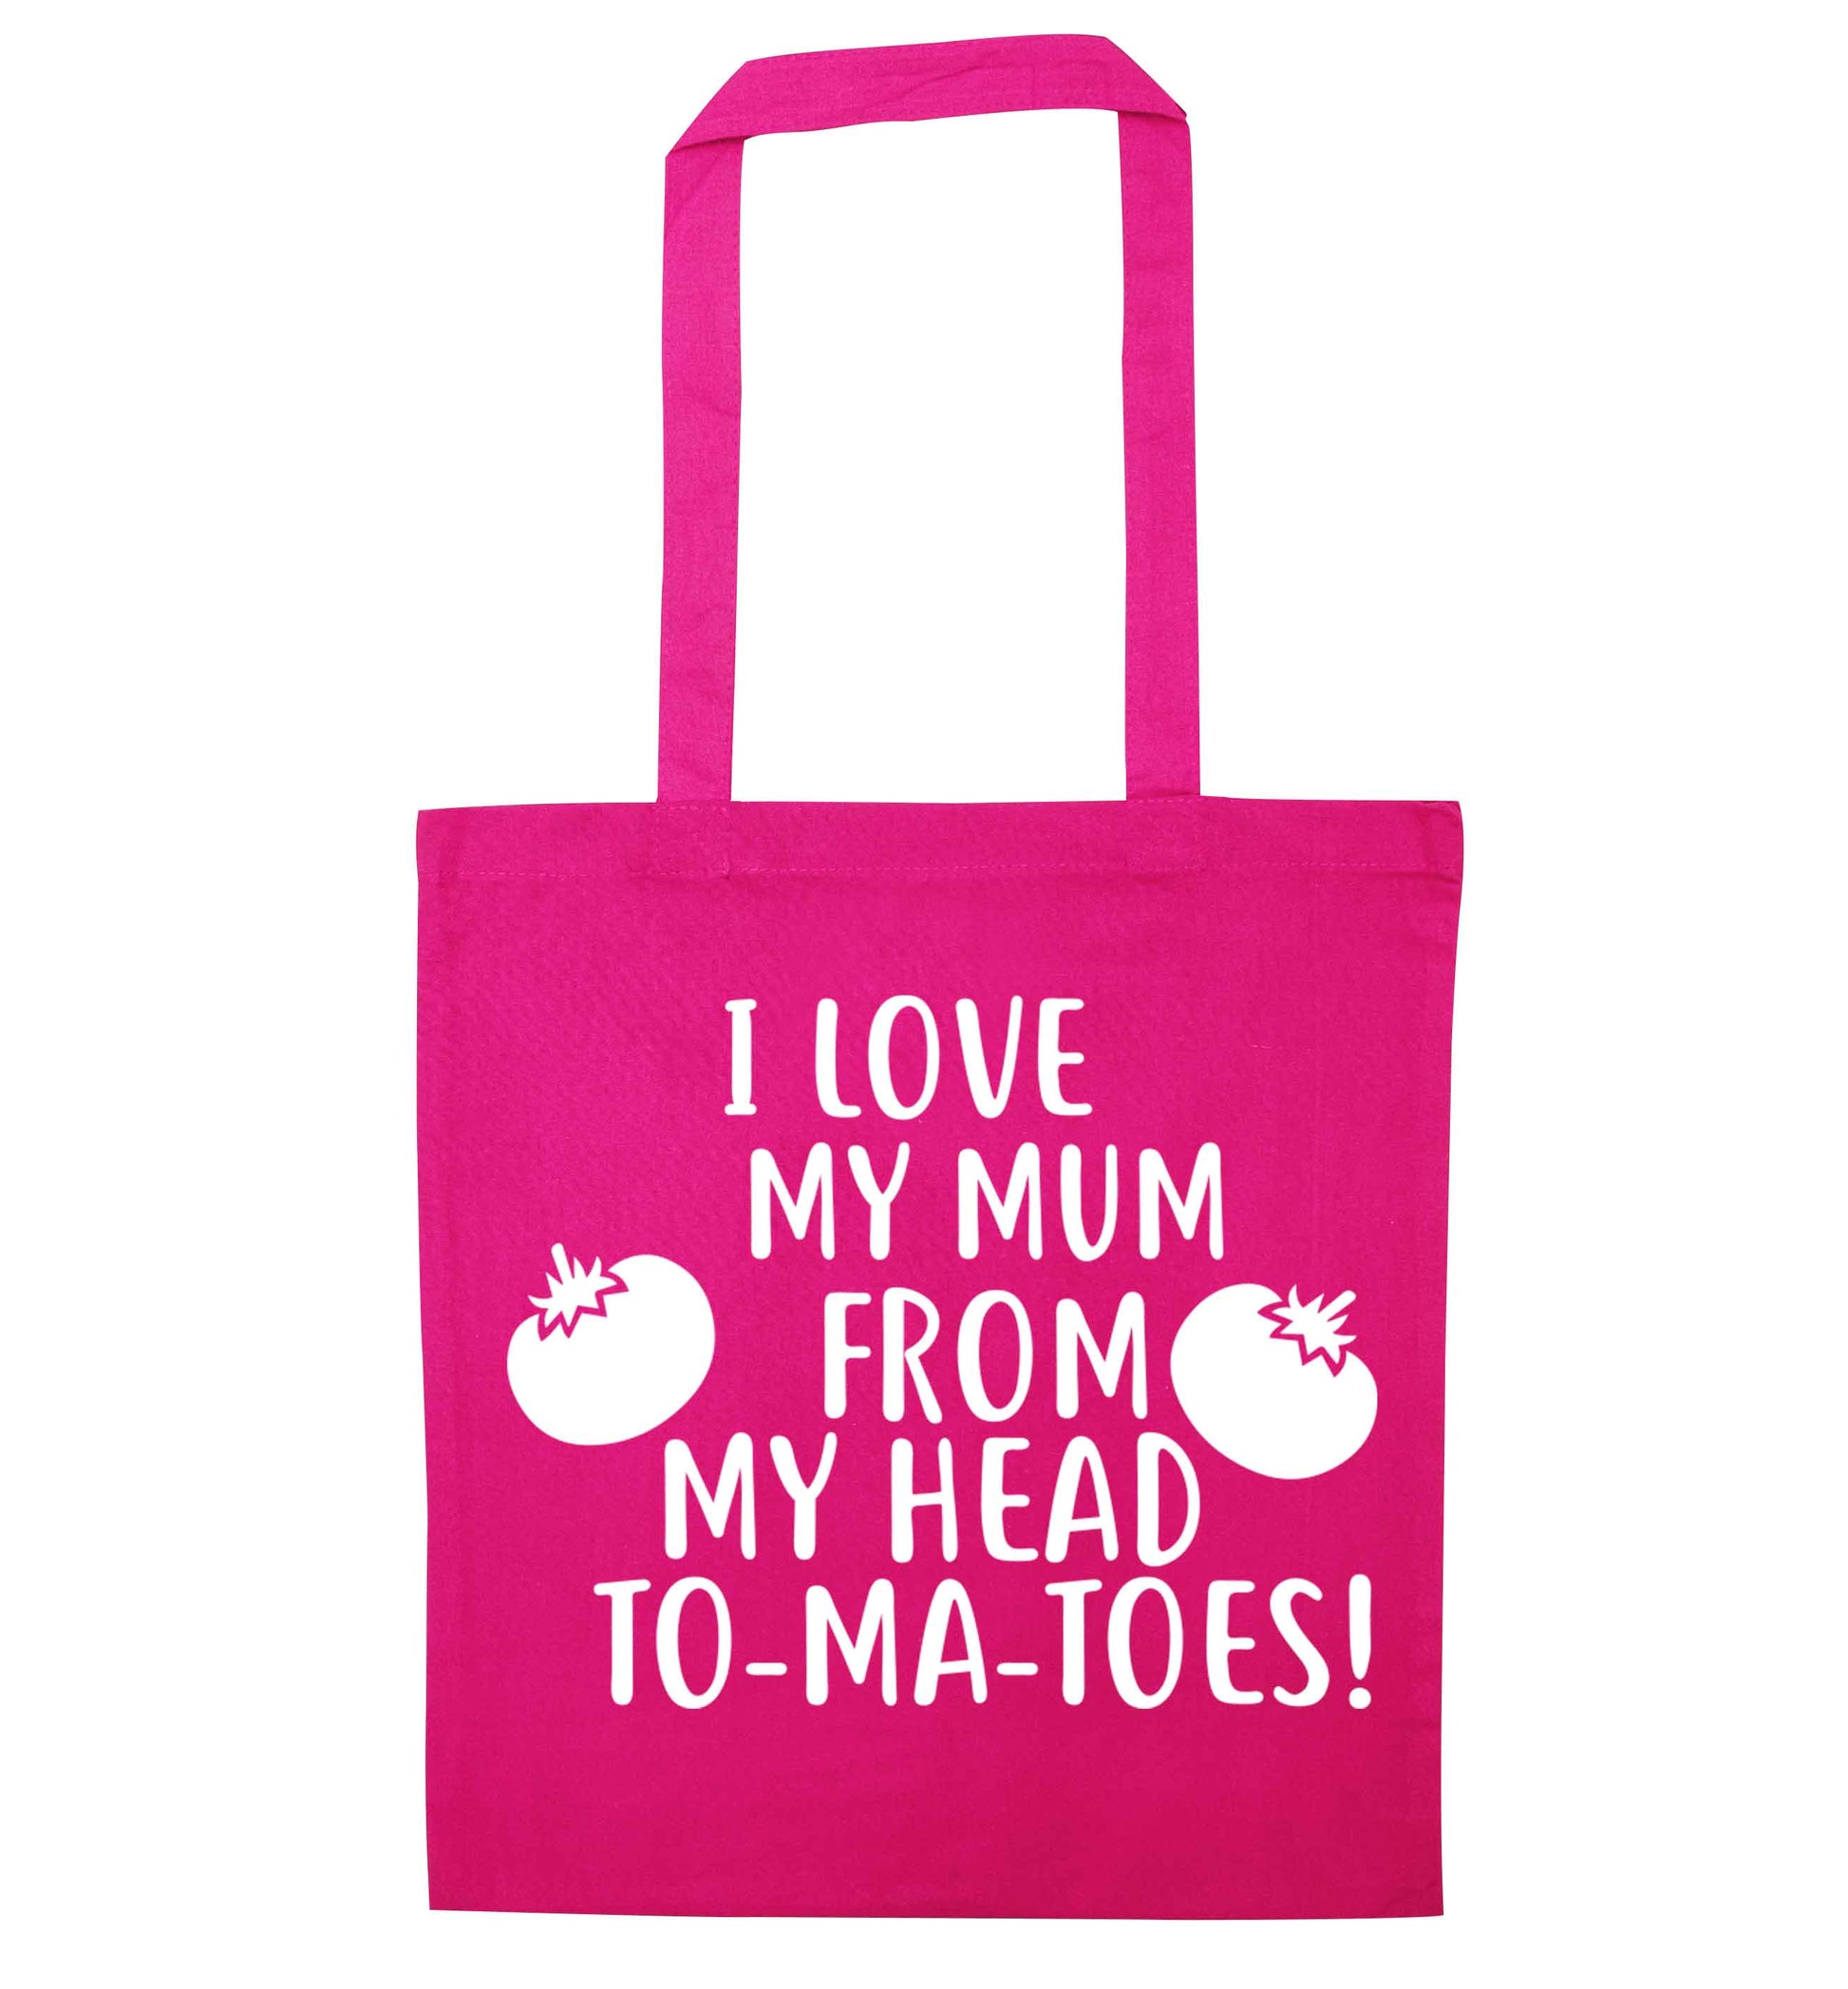 I love my mum from my head to-my-toes! pink tote bag